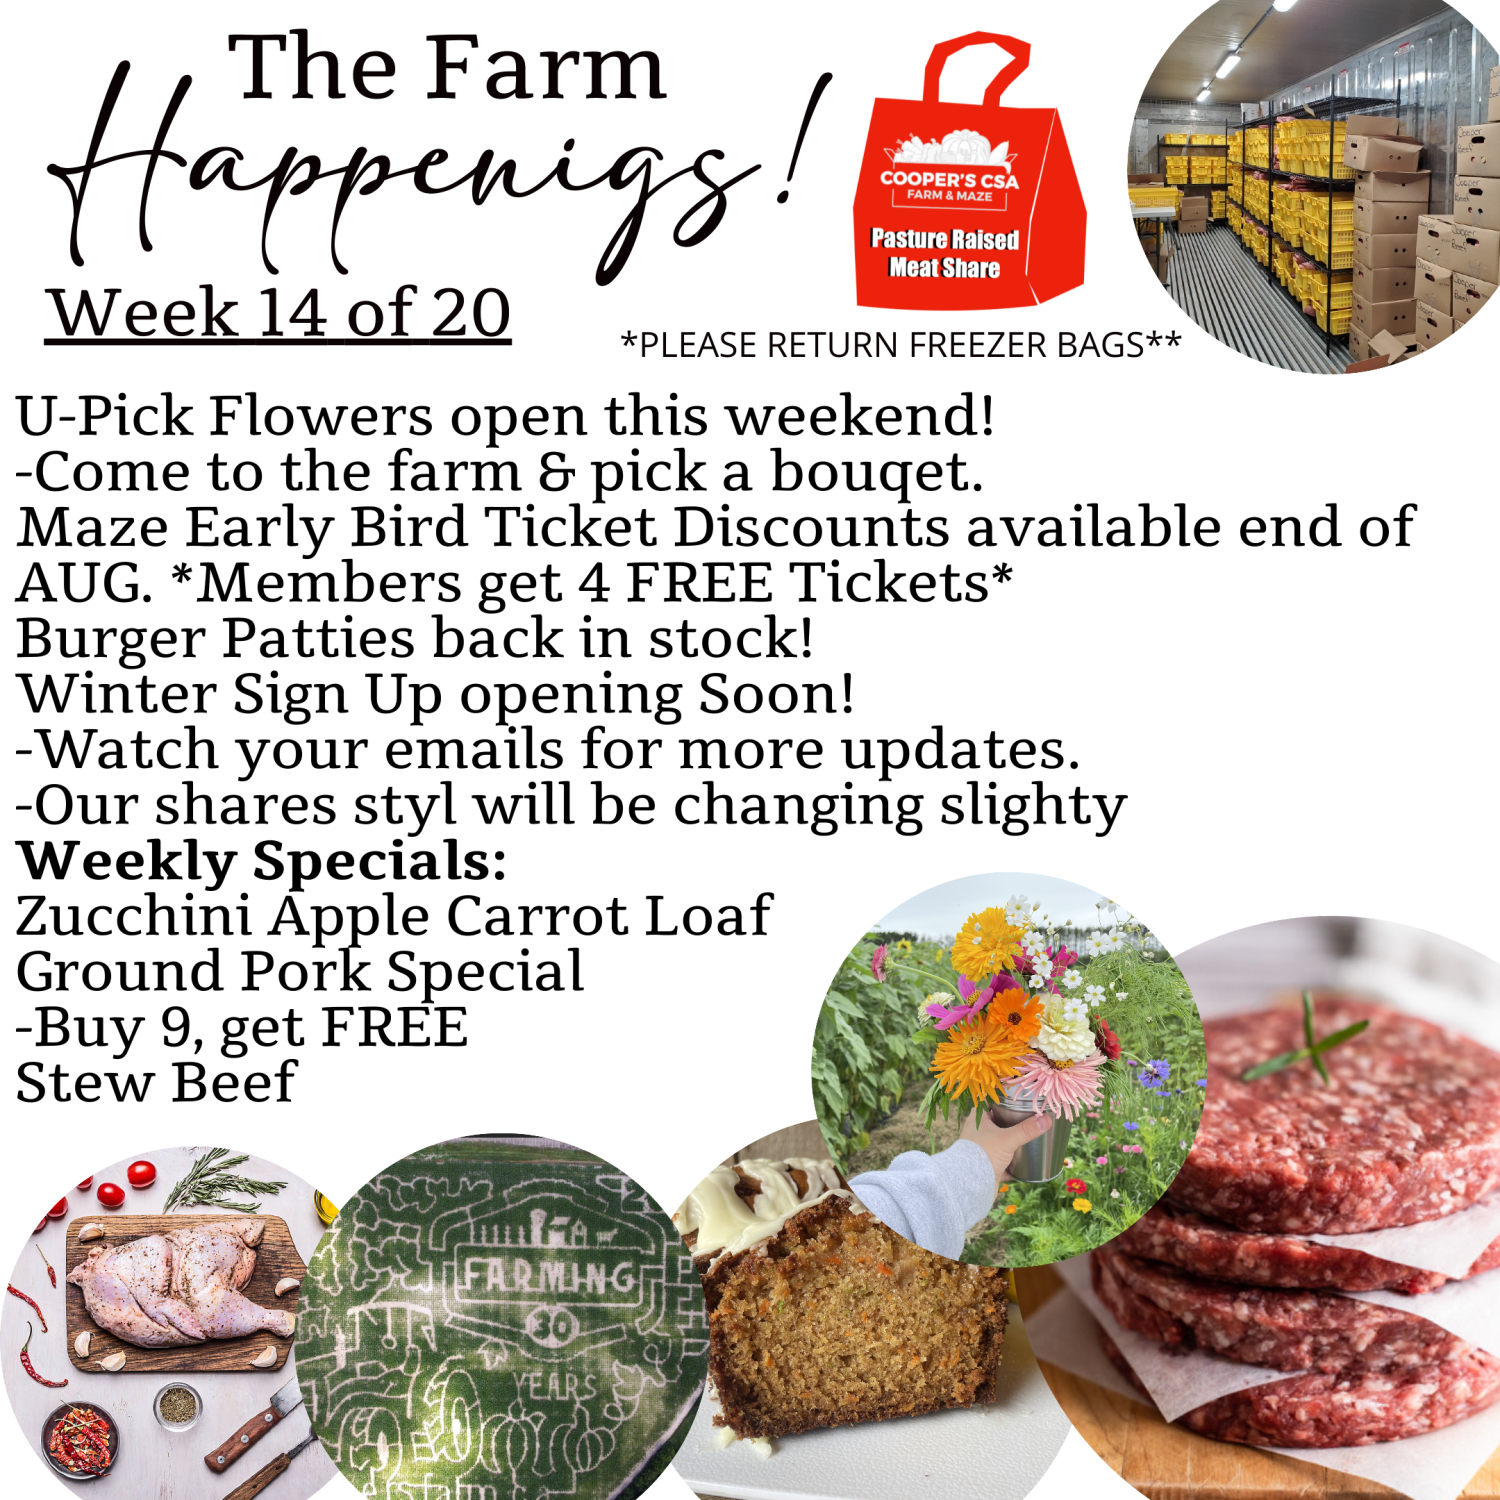 Previous Happening: "Pasture Meat Shares"-Coopers CSA Farm Farm Happenings Week 14